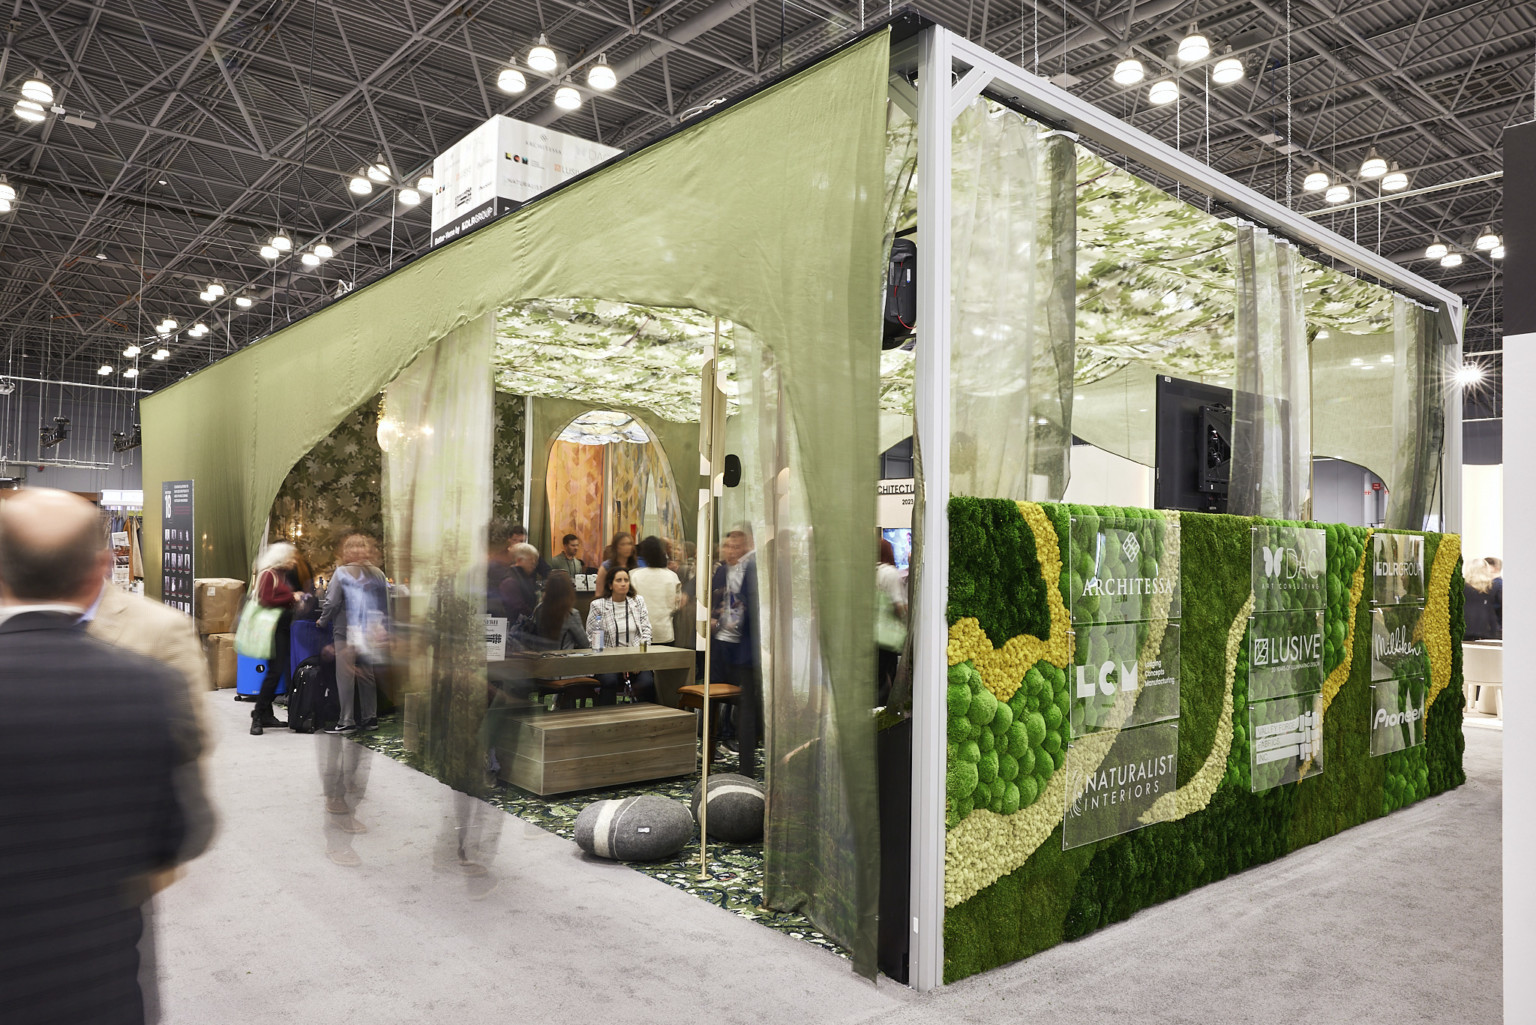 Exterior corner view of DLR Group's BDNY 2022 convention booth with textural living wall and green drapes around seating area